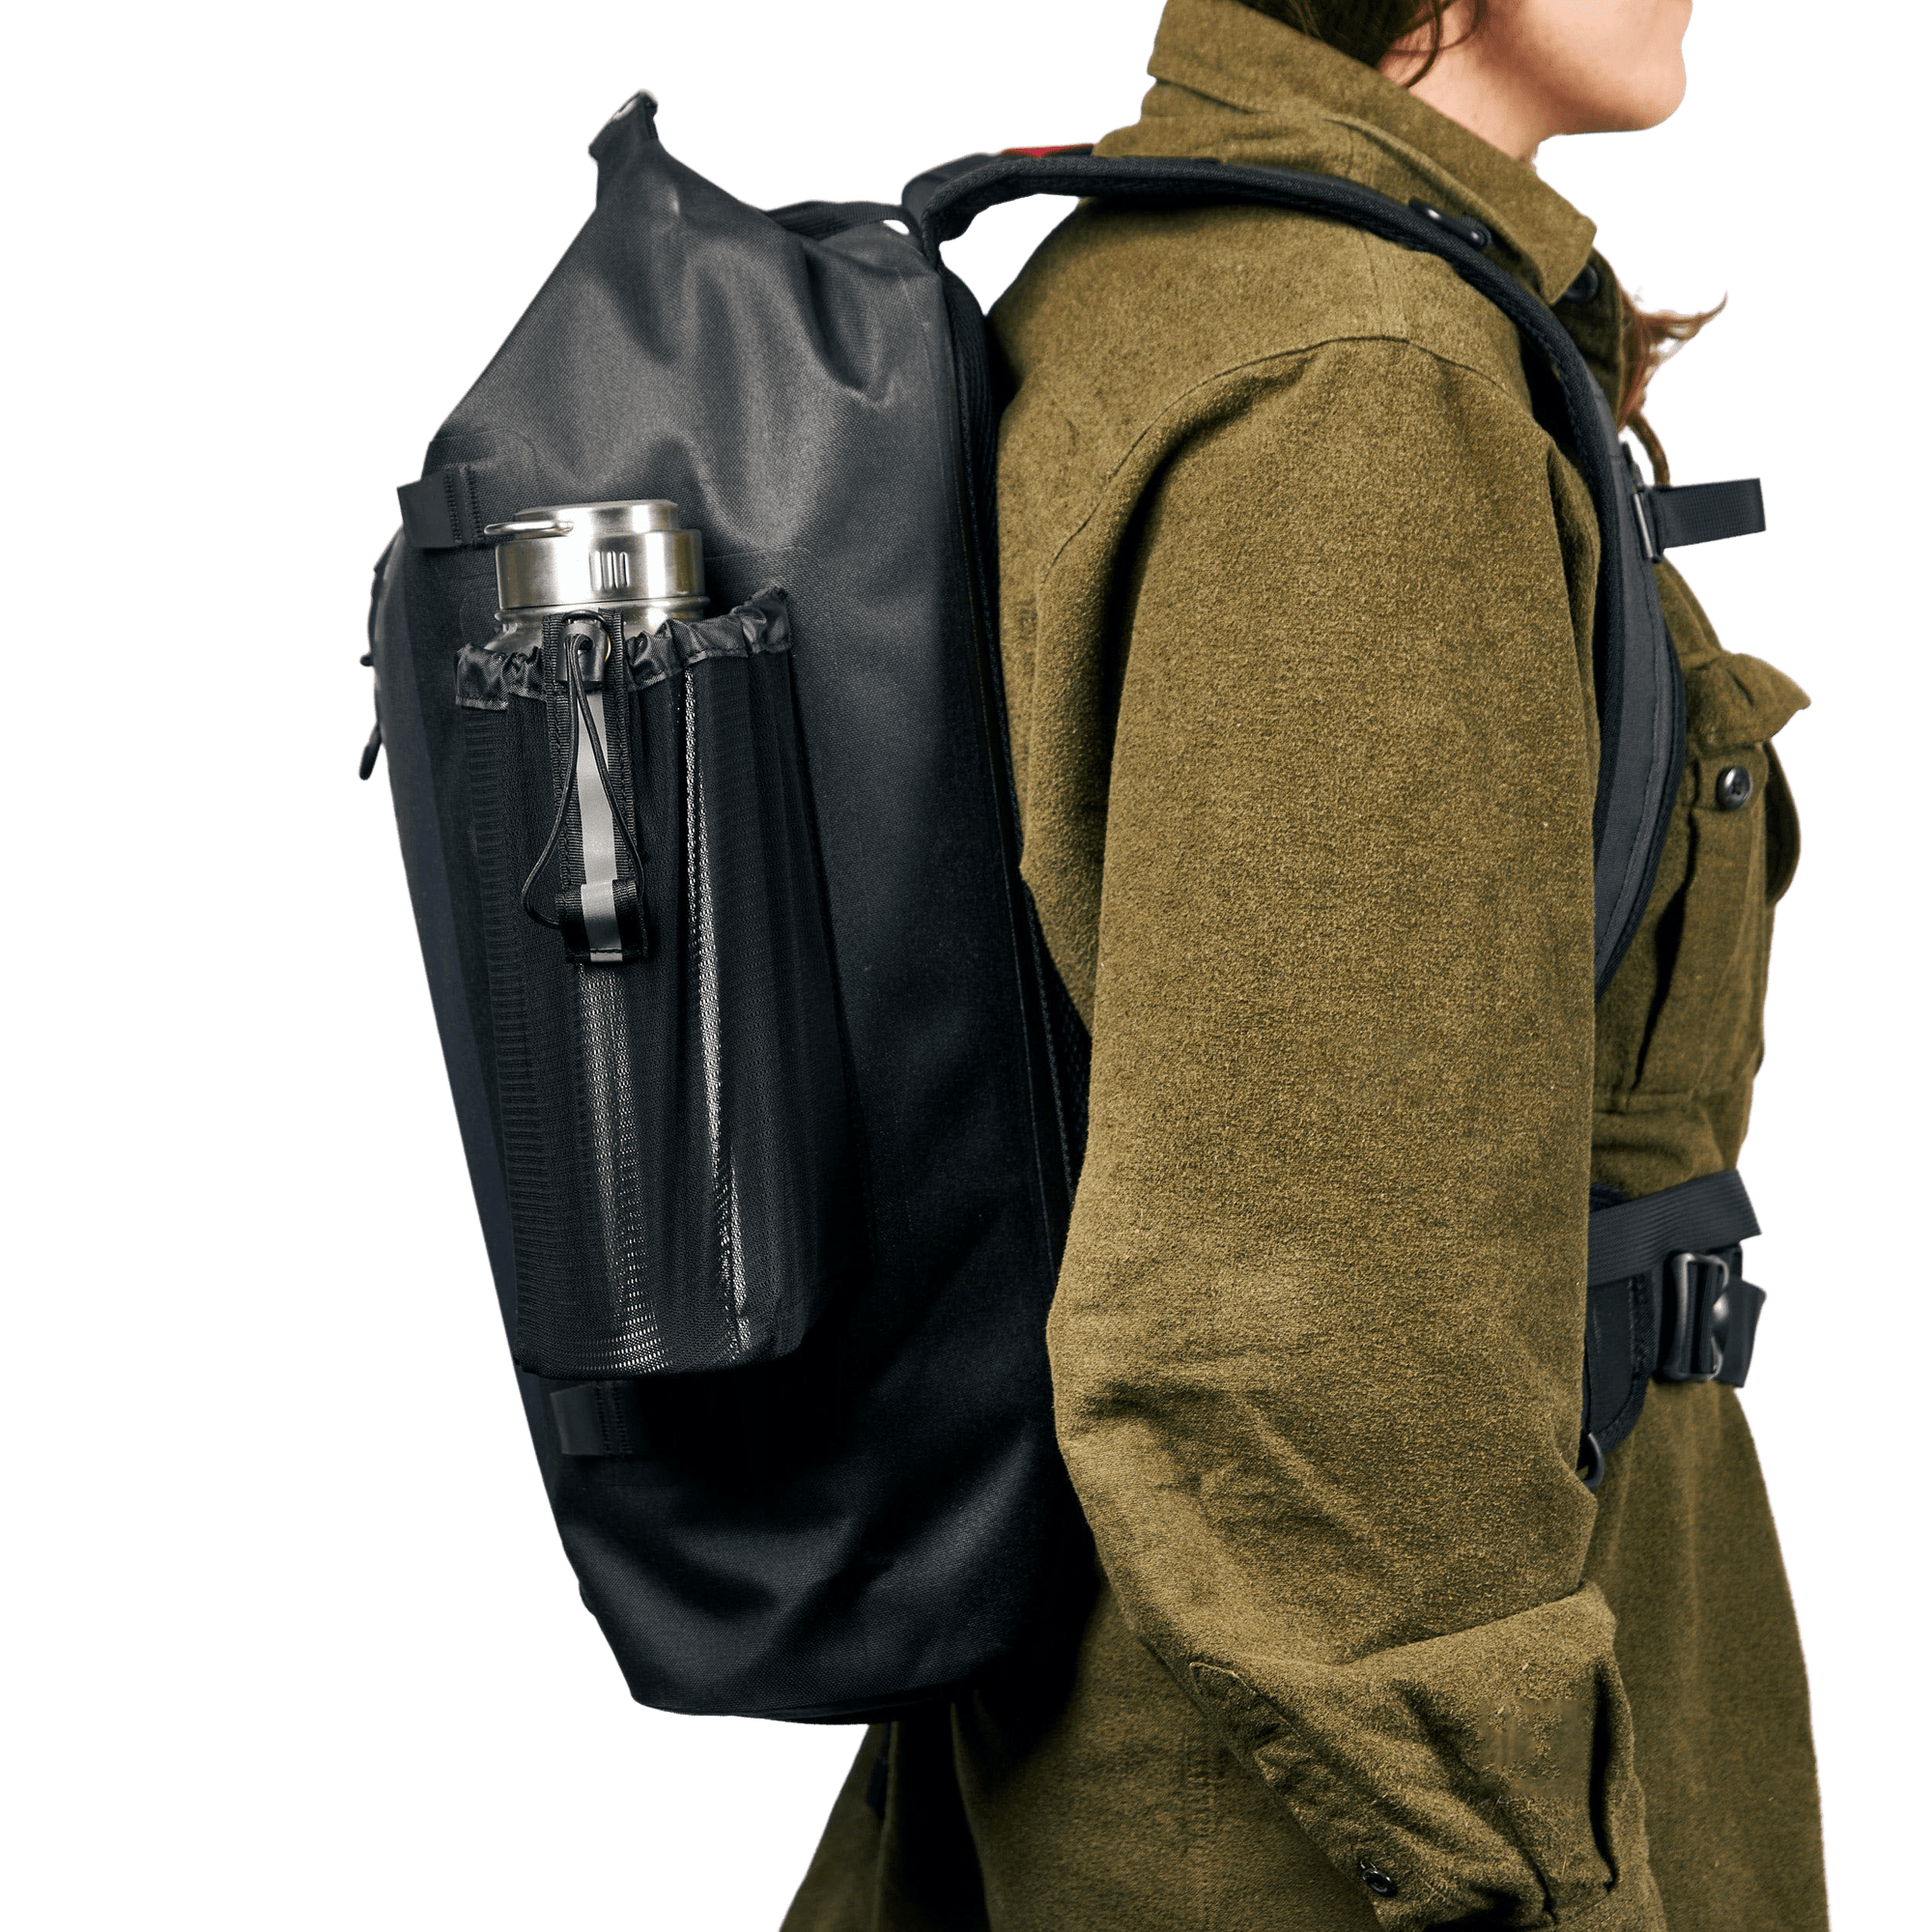 Uncharted Supply Co SEVENTY2 Survival System - Grey